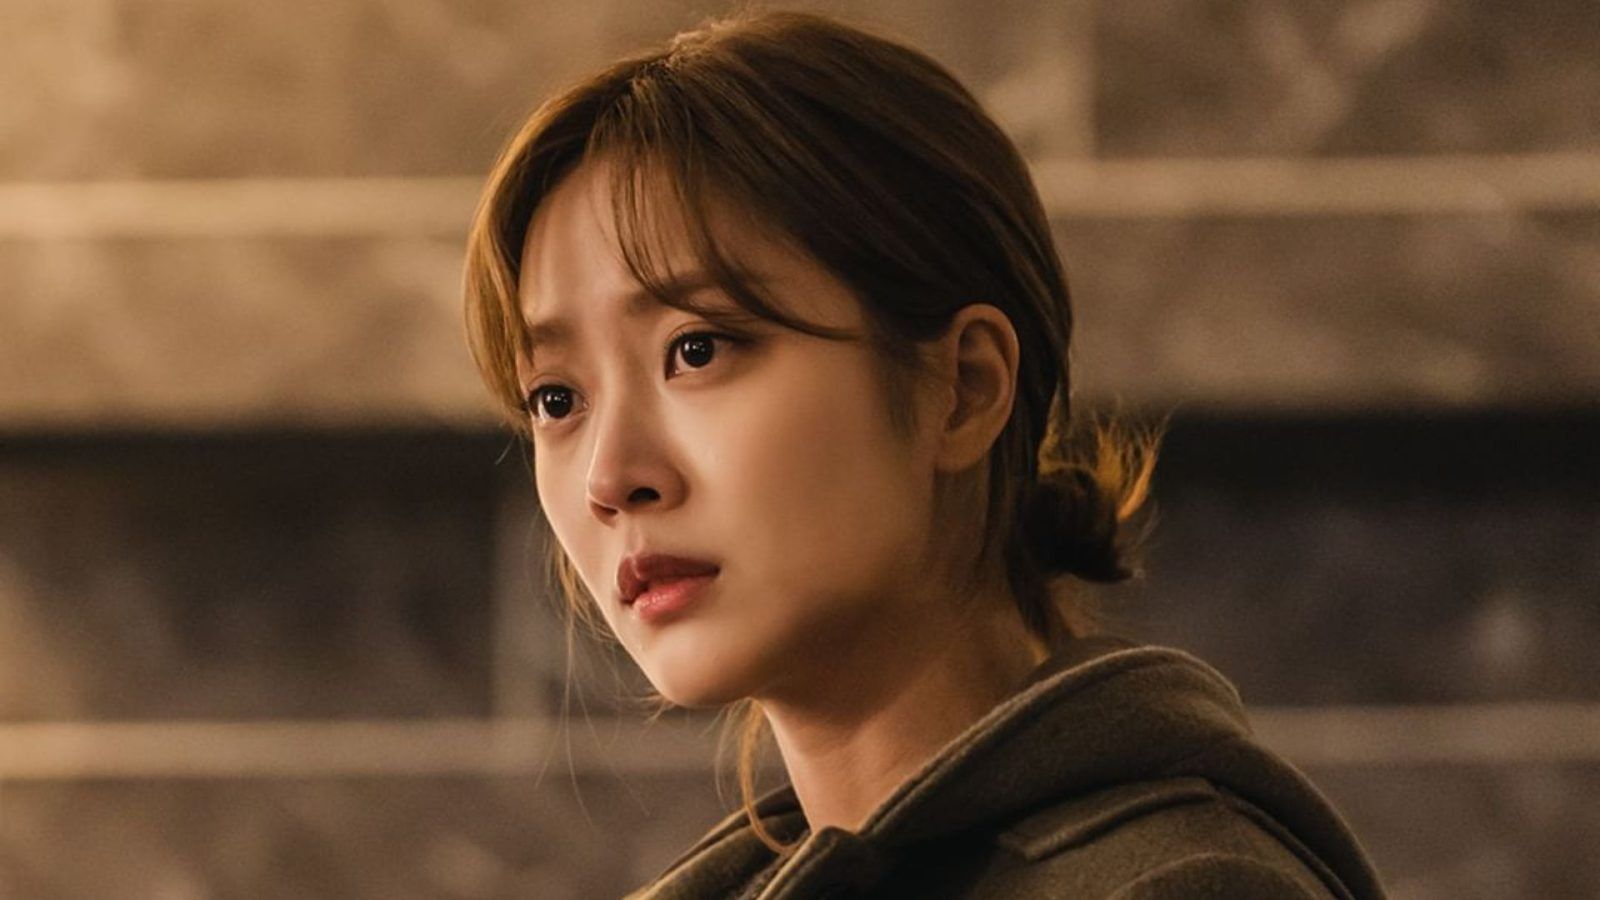 Stream-worthy movies and TV shows starring versatile actress Jo Bo-ah